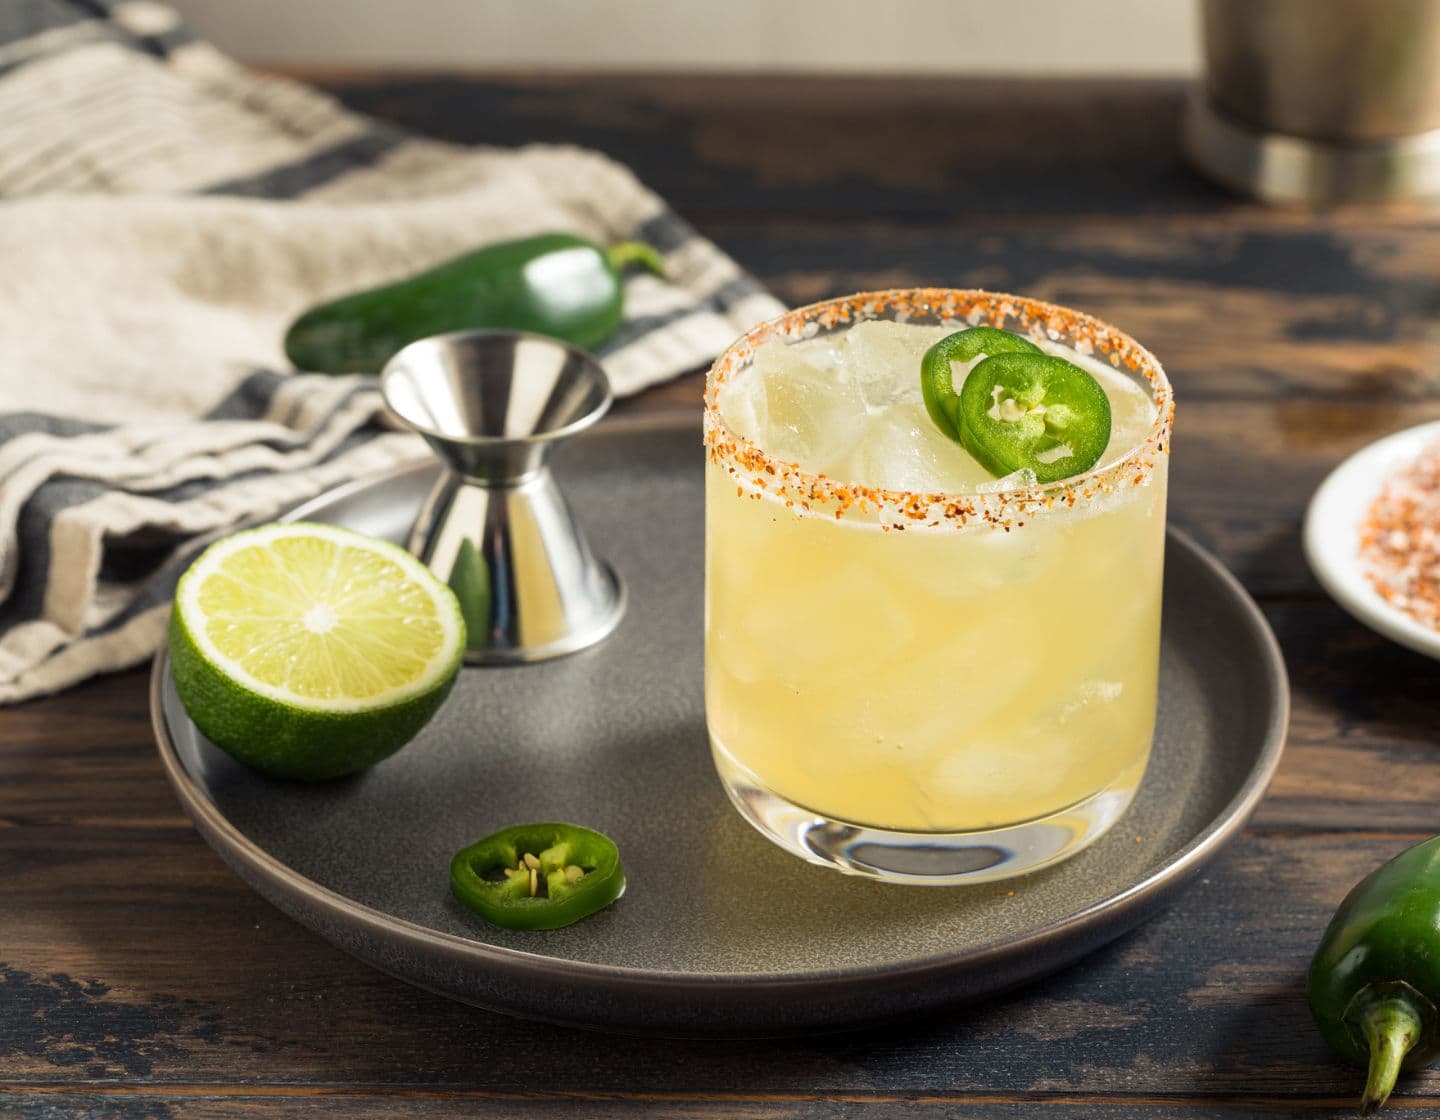 Margarita cocktail with spicy rim and garnish